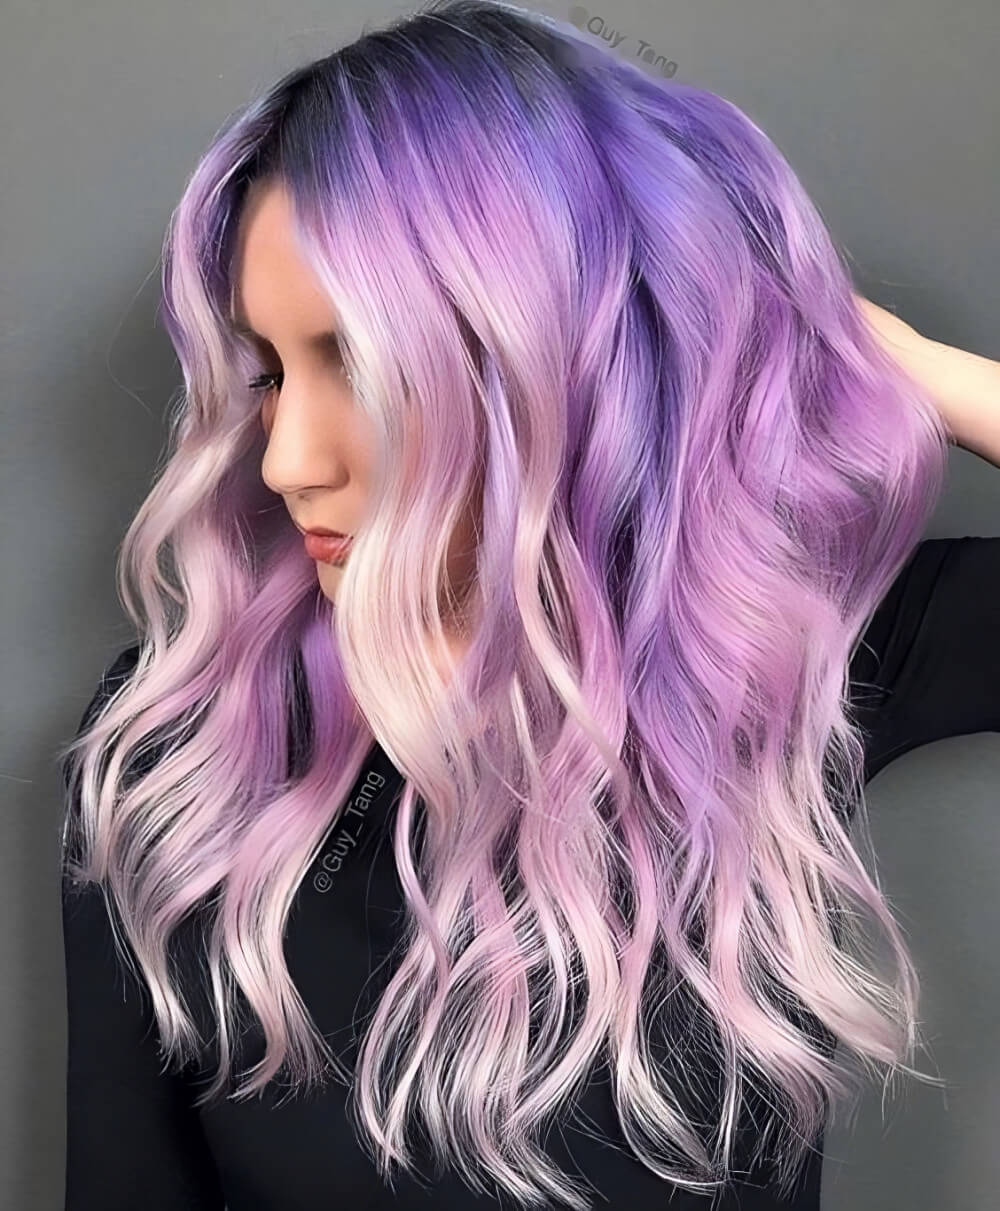 25 Lavender Hair Ideas Every Pretty Girl Should Check Out - 185